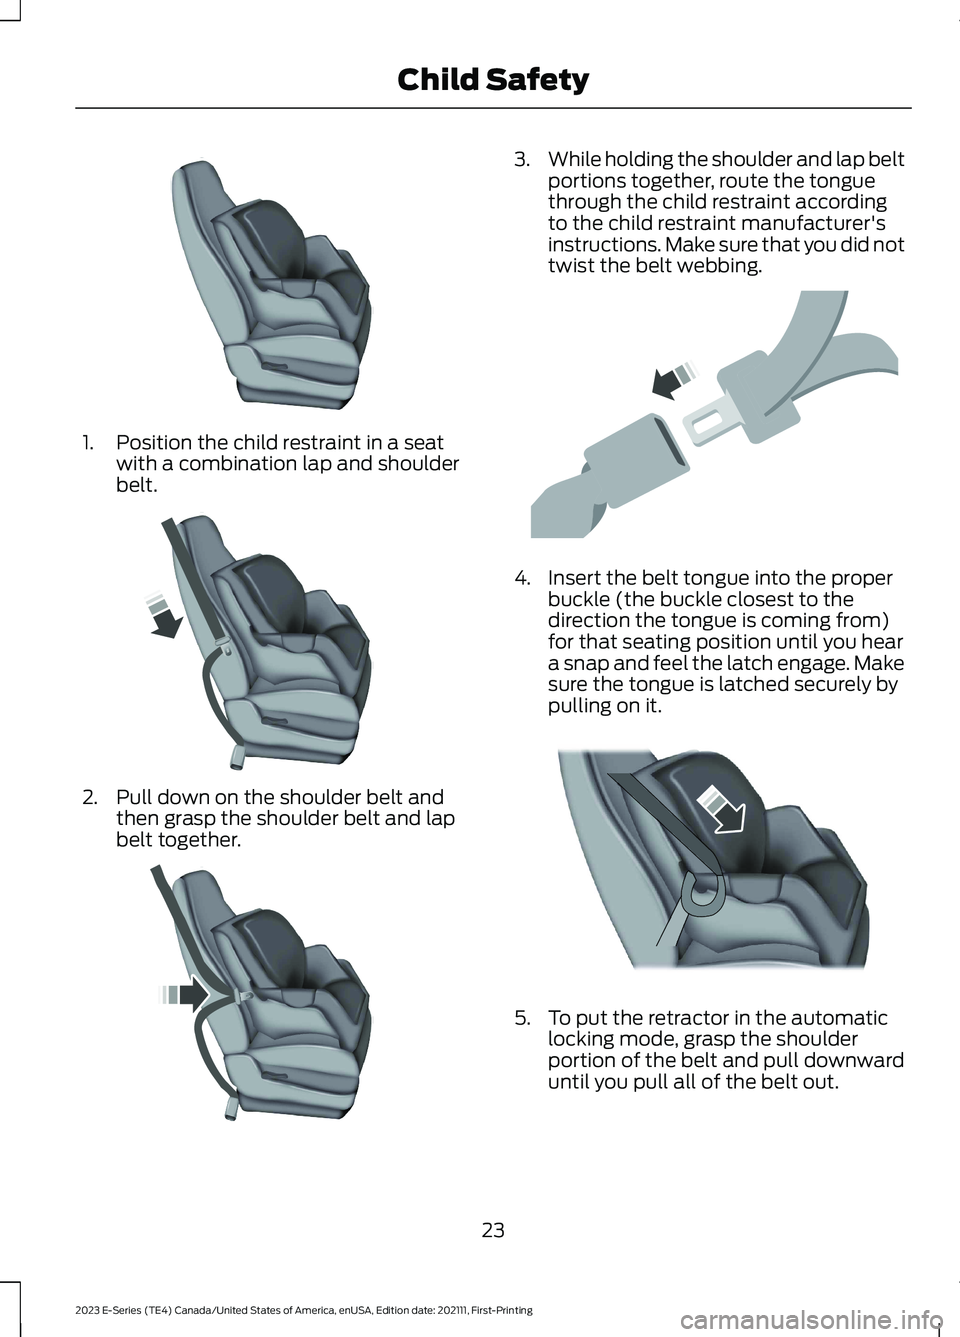 FORD E SERIES 2023  Owners Manual 1.Position the child restraint in a seatwith a combination lap and shoulderbelt.
2.Pull down on the shoulder belt andthen grasp the shoulder belt and lapbelt together.
3.While holding the shoulder and